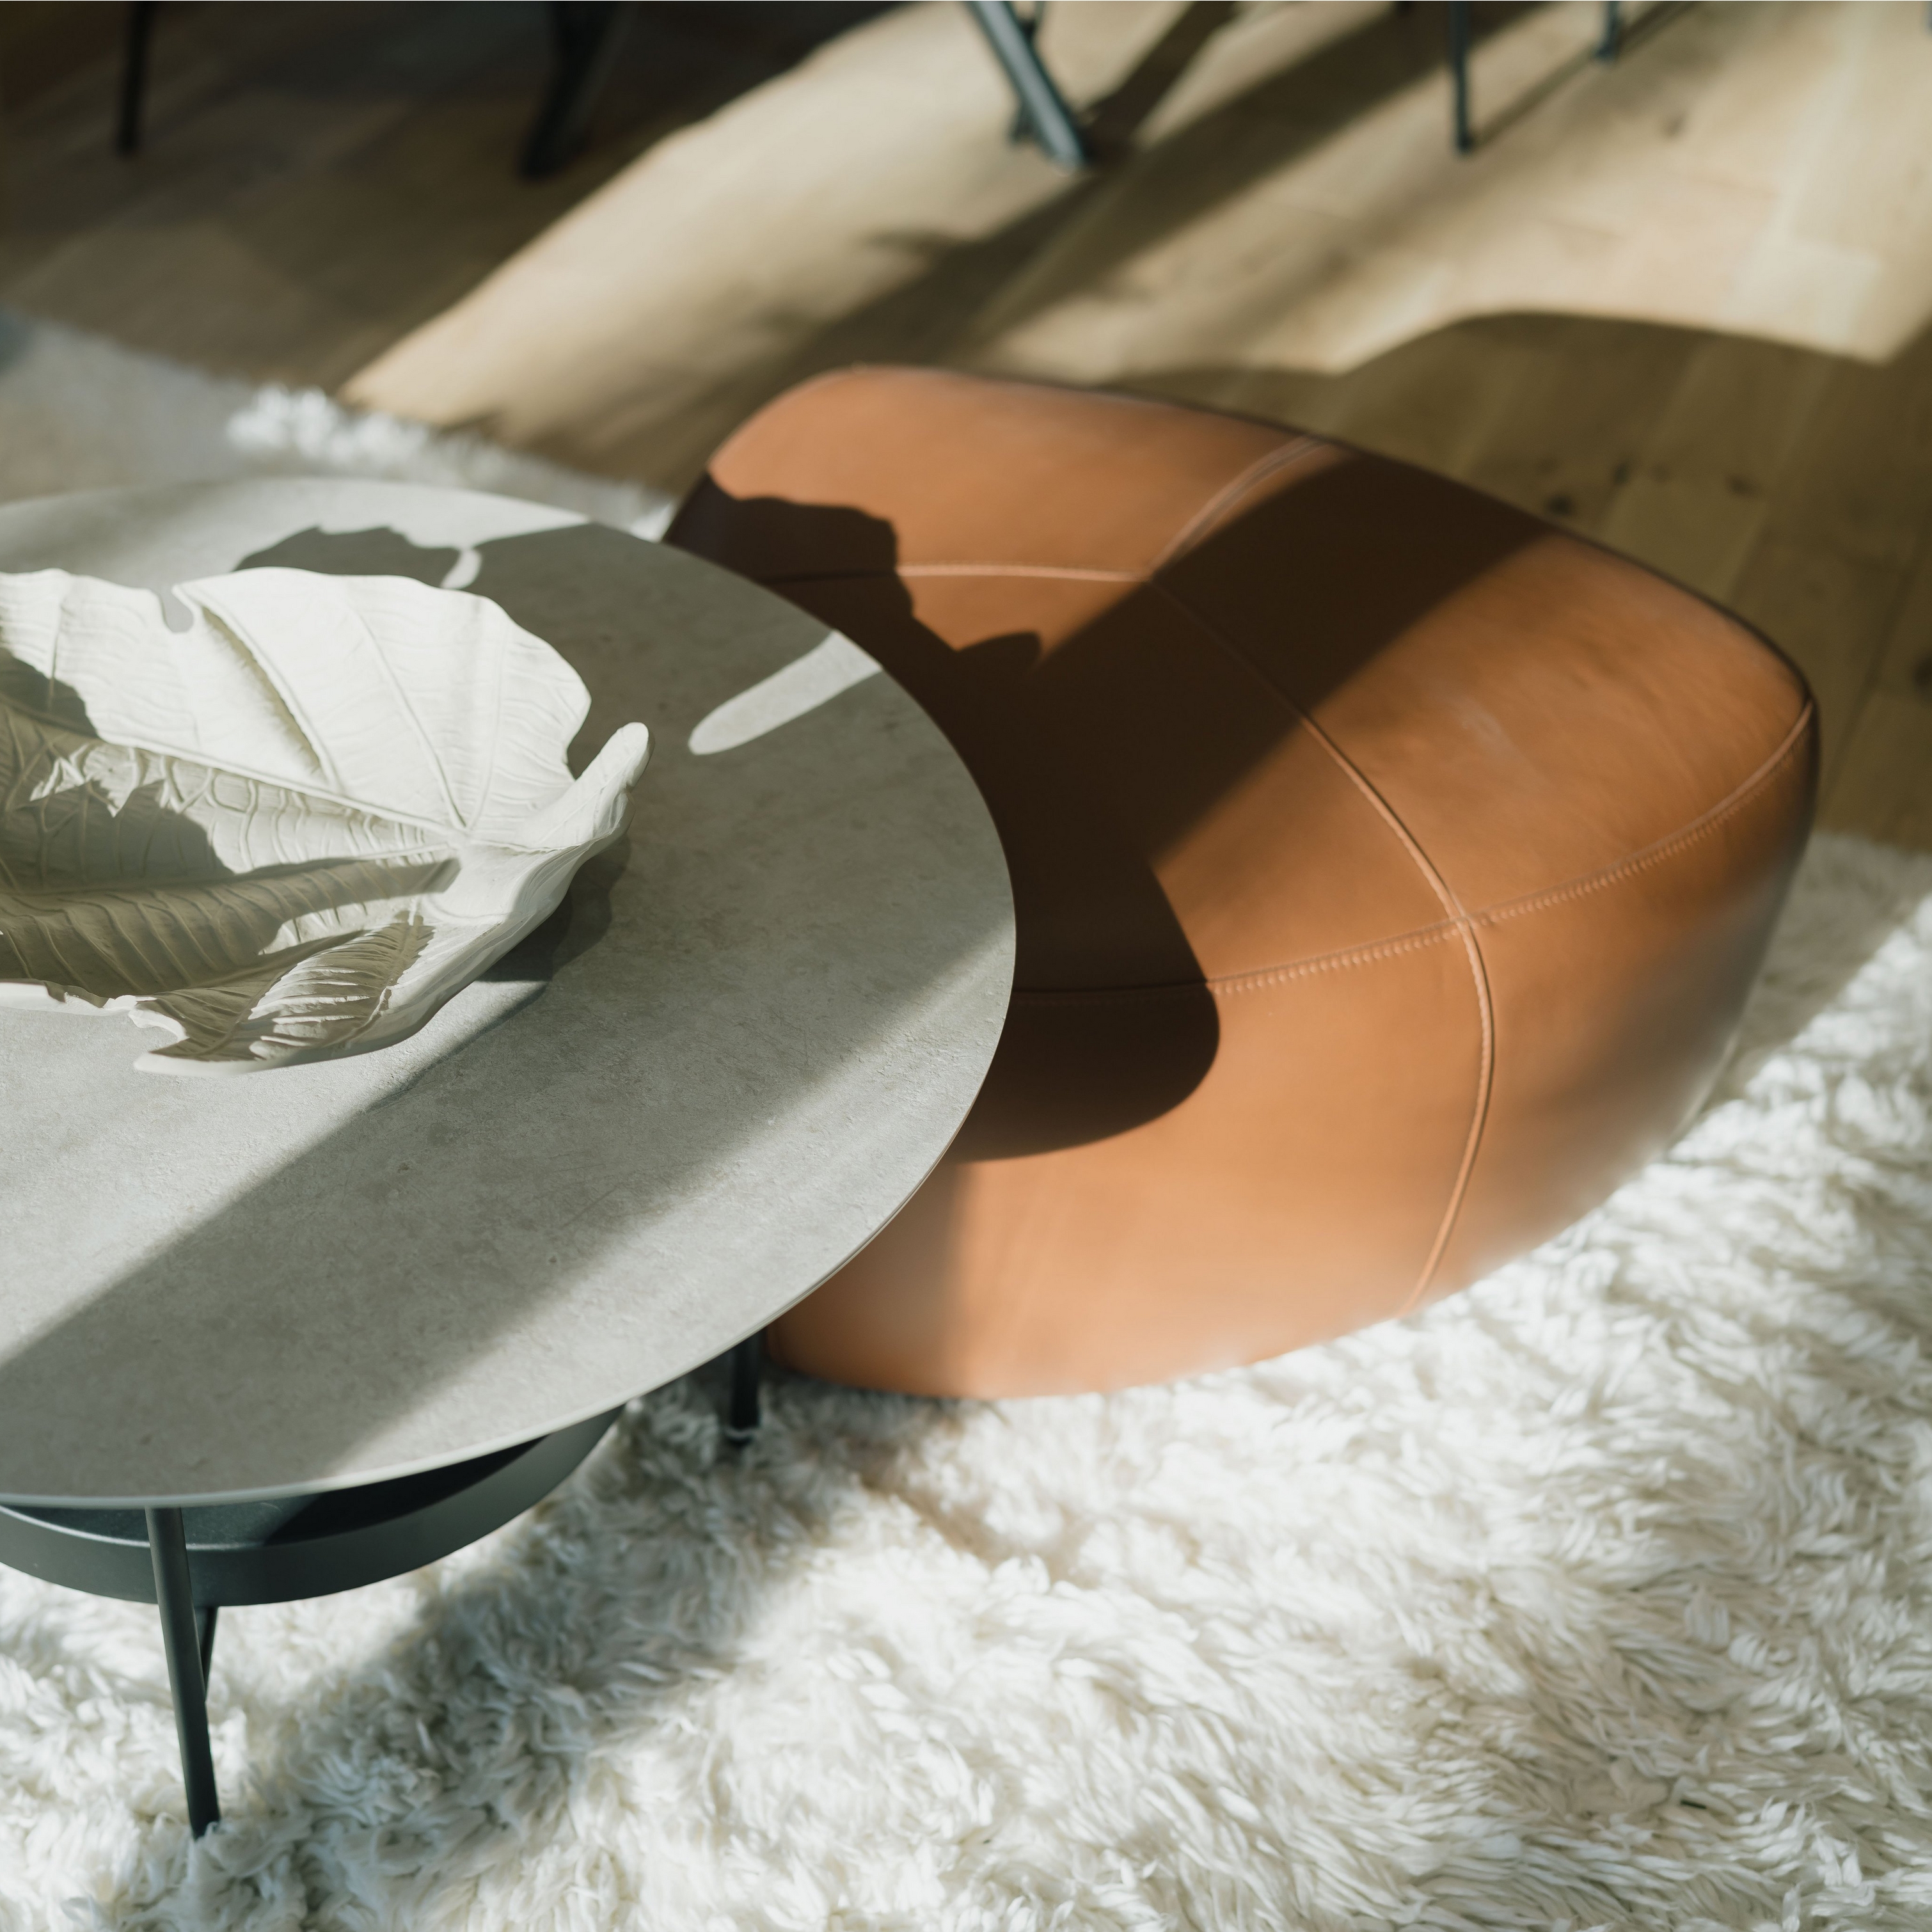 Round table with decorative leaf, tan ottoman, on a white fluffy rug in sunlight.